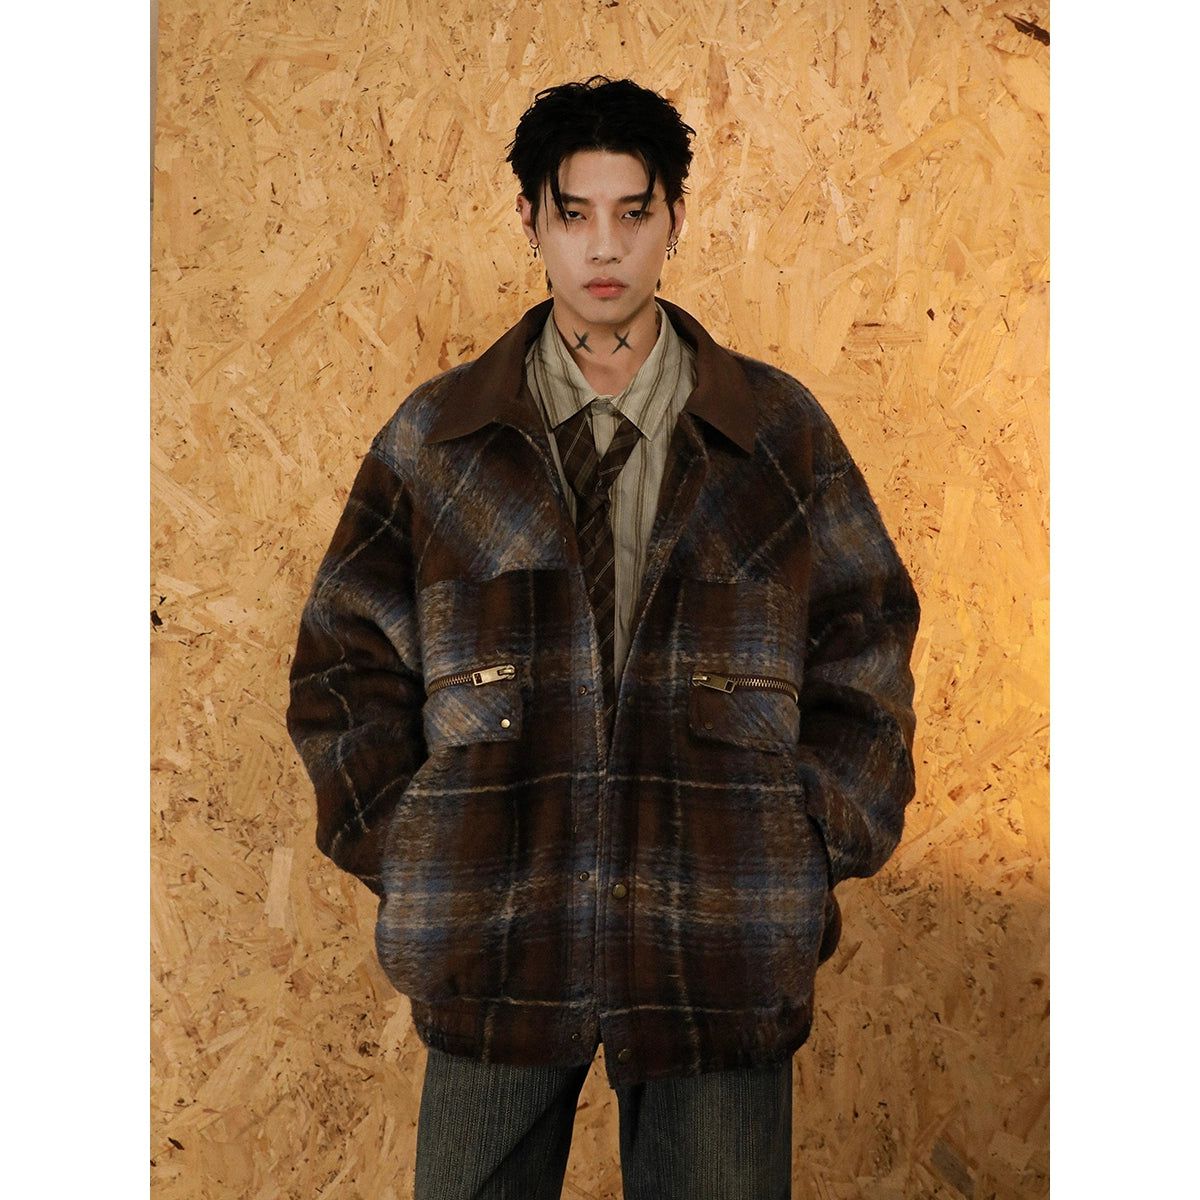 Plaid Collared Jacket Korean Street Fashion Jacket By Mr Nearly Shop Online at OH Vault